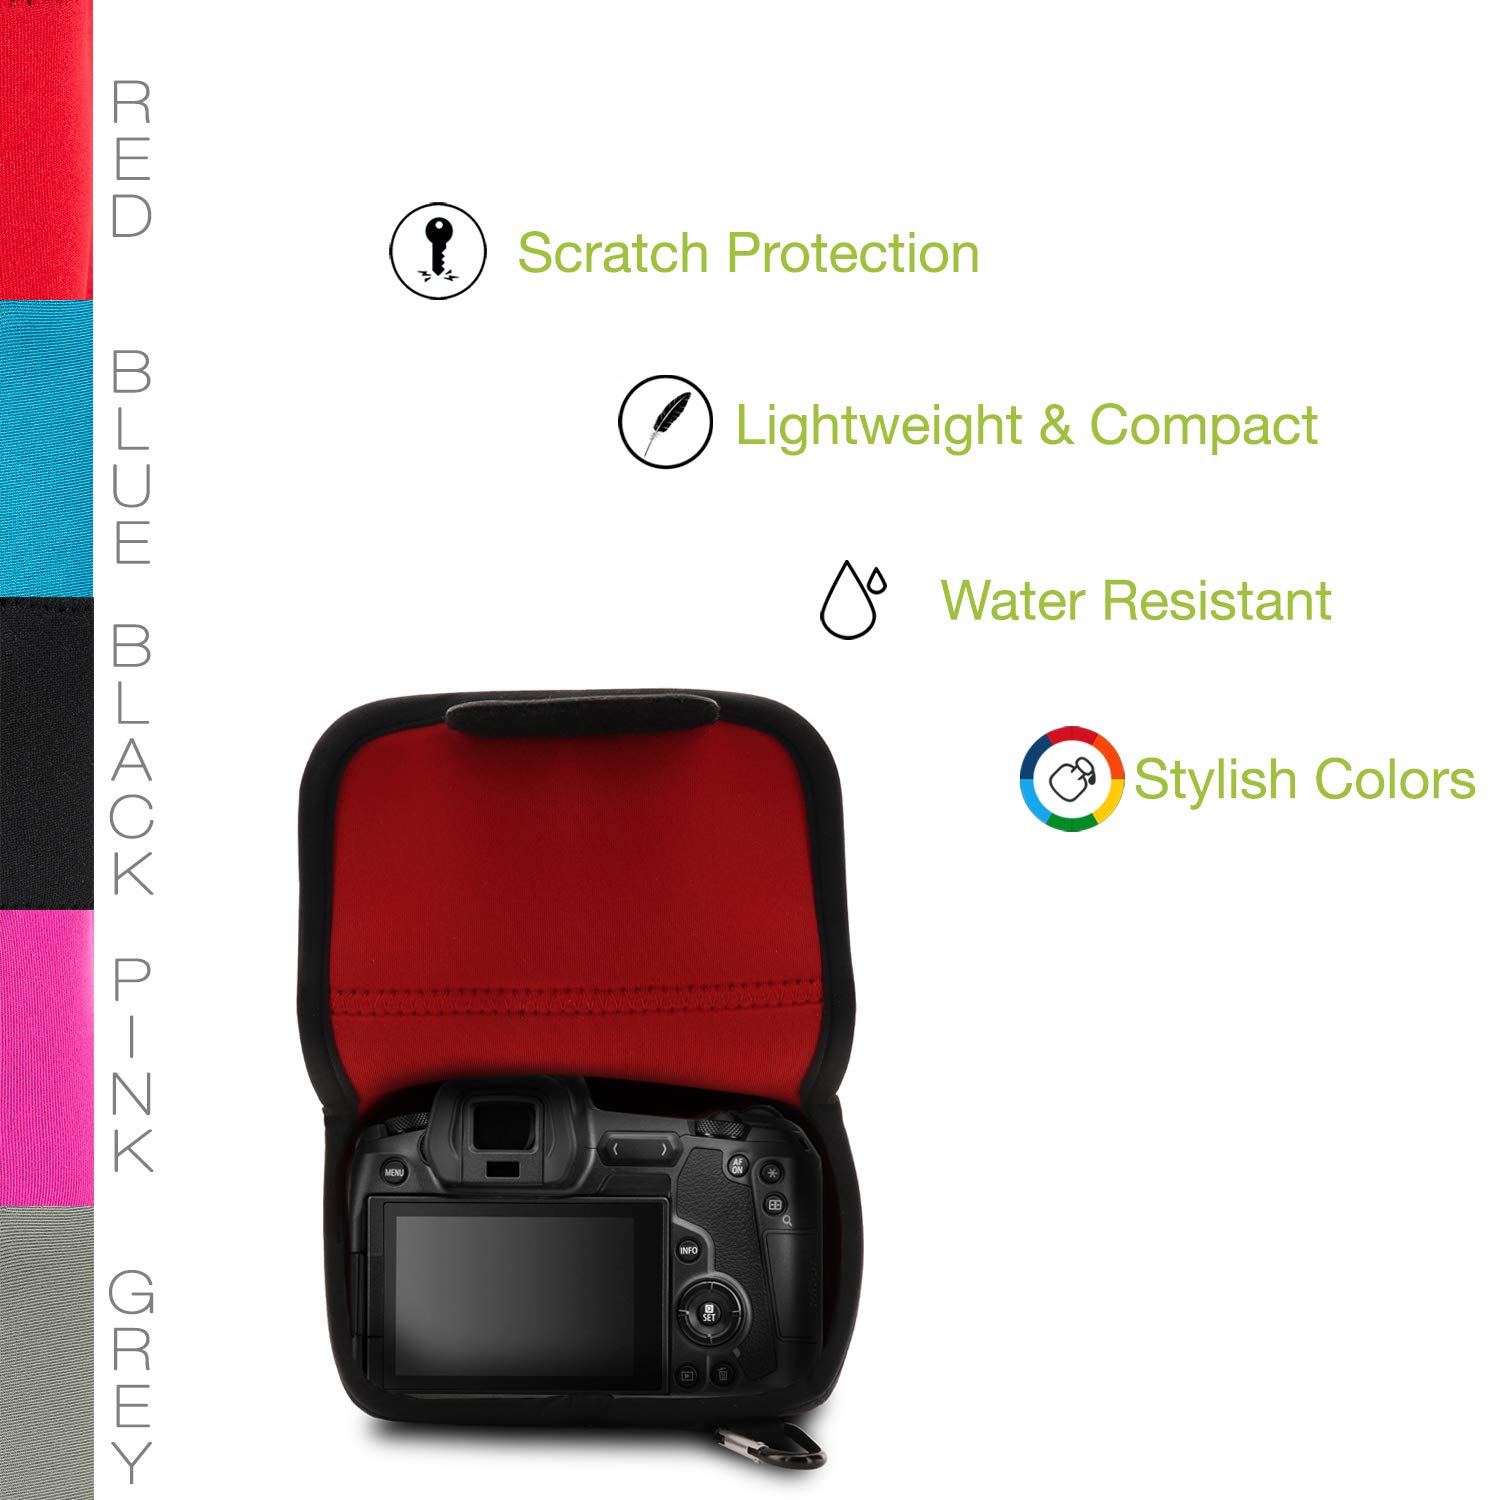 MegaGear MG1556 Ultra Light Neoprene Camera Case Compatible with Canon EOS Ra, RP, R (24-105mm) - Black, One Size